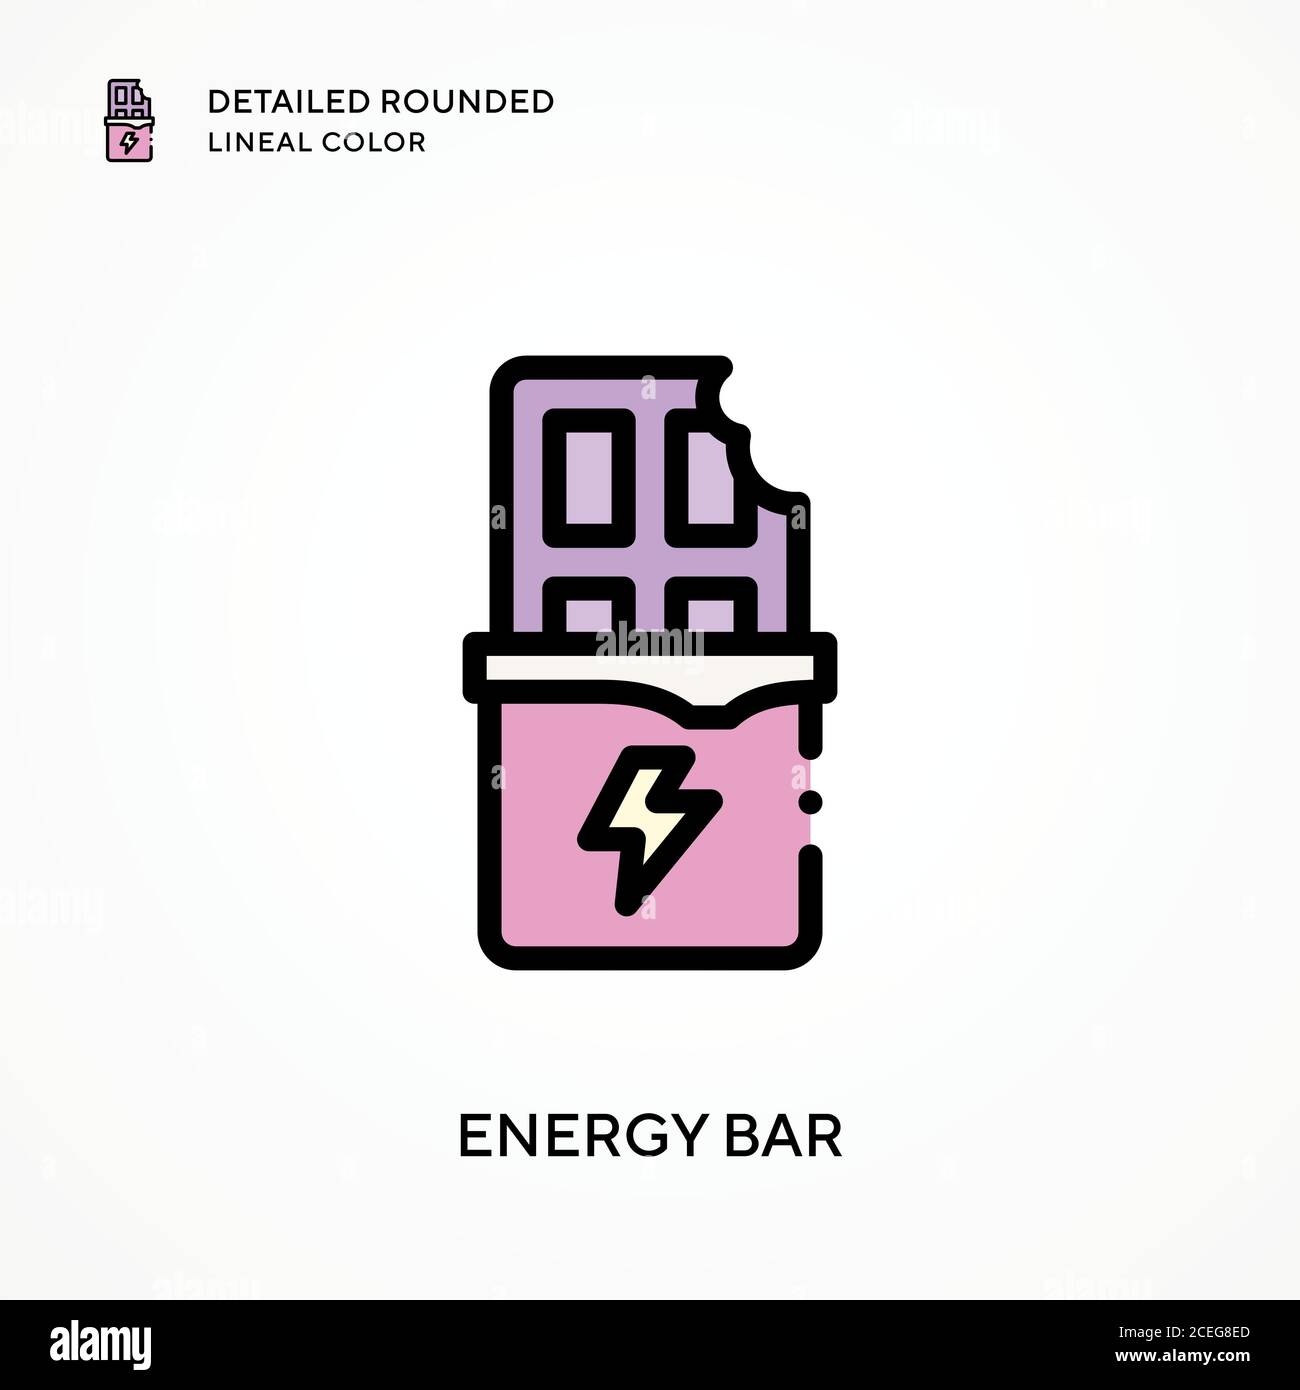 Energy bar detailed rounded lineal color. Modern vector illustration concepts. Easy to edit and customize. Stock Vector